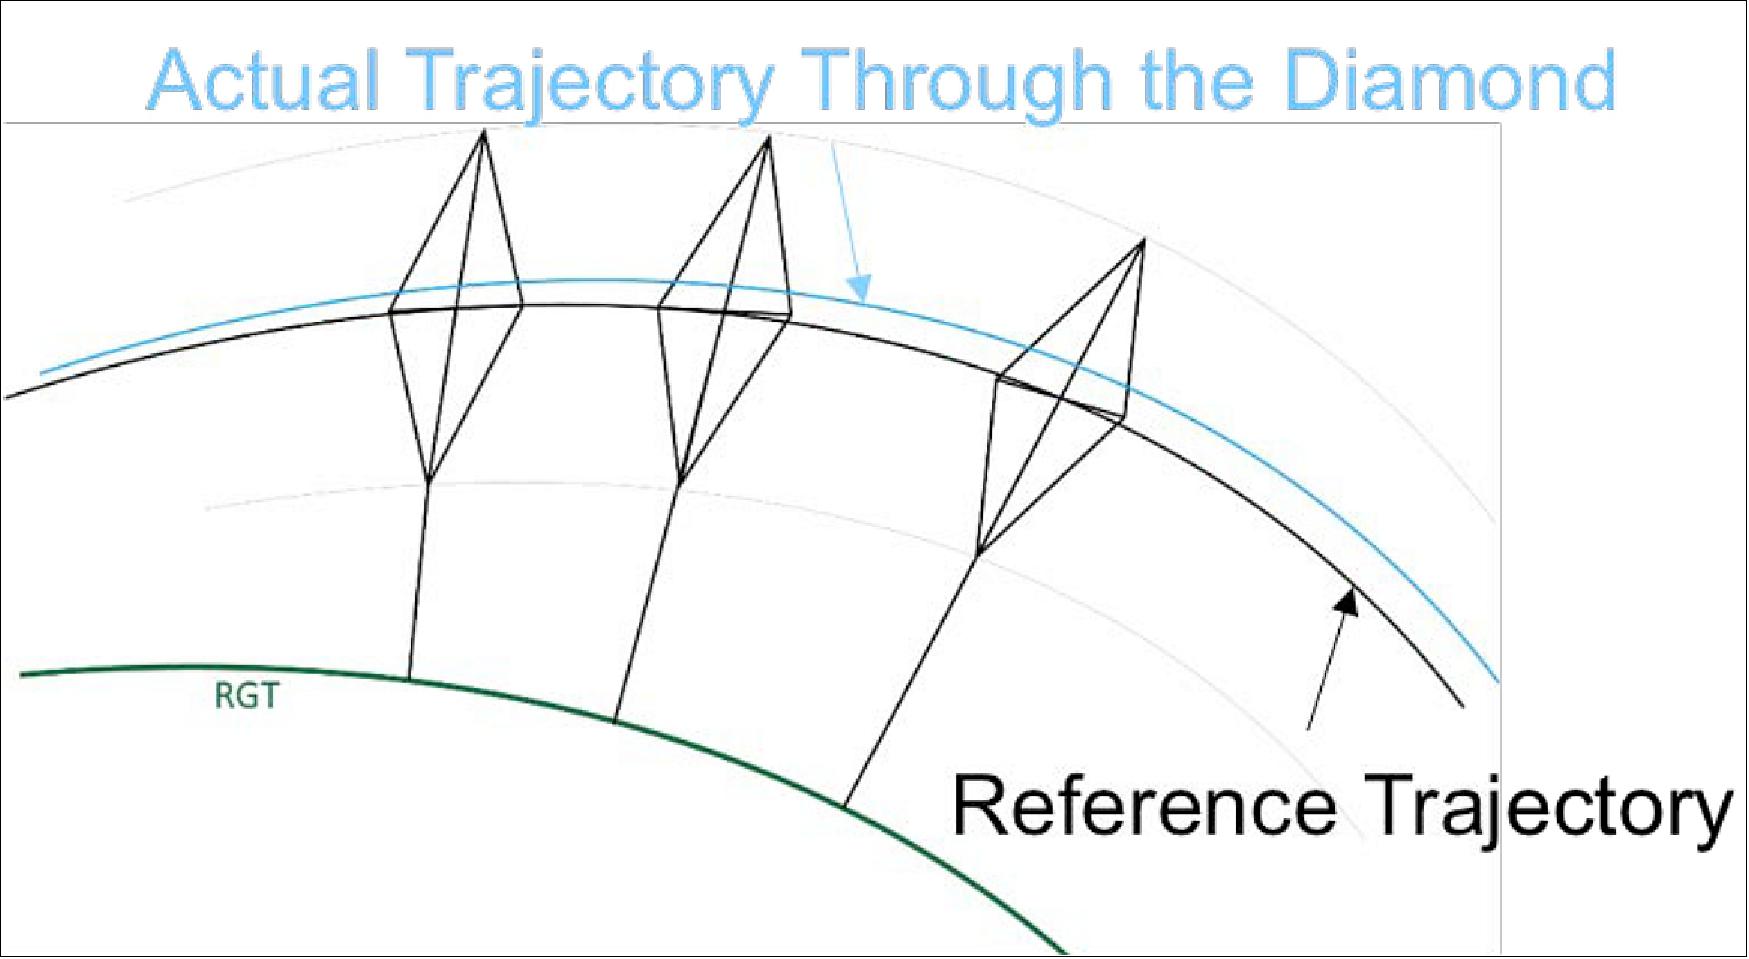 Figure 6: Actual versus reference trajectory for NISAR as maintained within the diamond (image credit: NASA/JPL-Caltech)